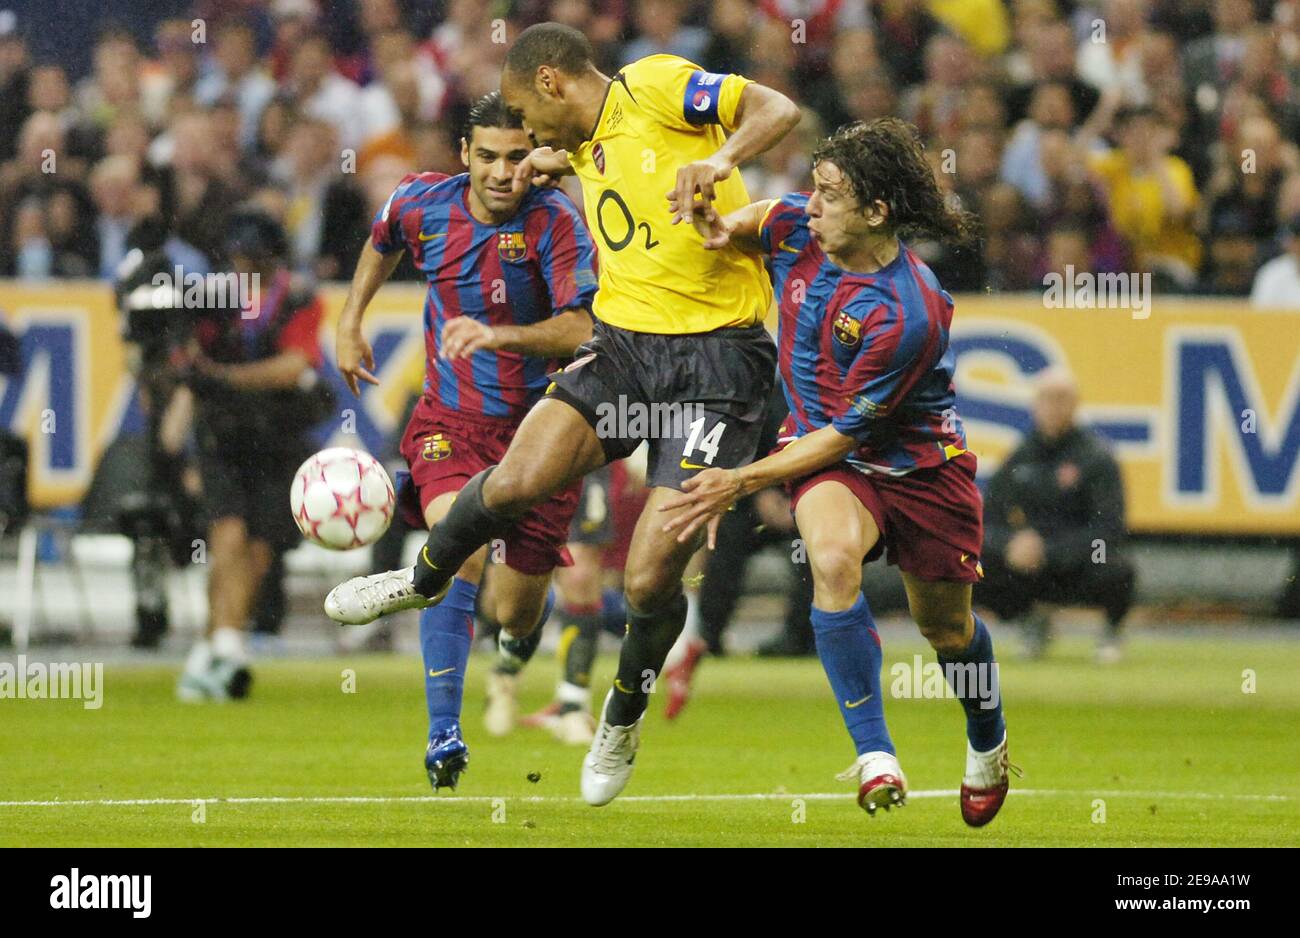 Barcelona'S Carlos Puyol And Arsenal'S Thierry Henry Battle For The Ball  During The Champions League Final, Barcelona Vs Arsenal, At The Stade De  France, In Saint Denis, Near Paris, France, On May